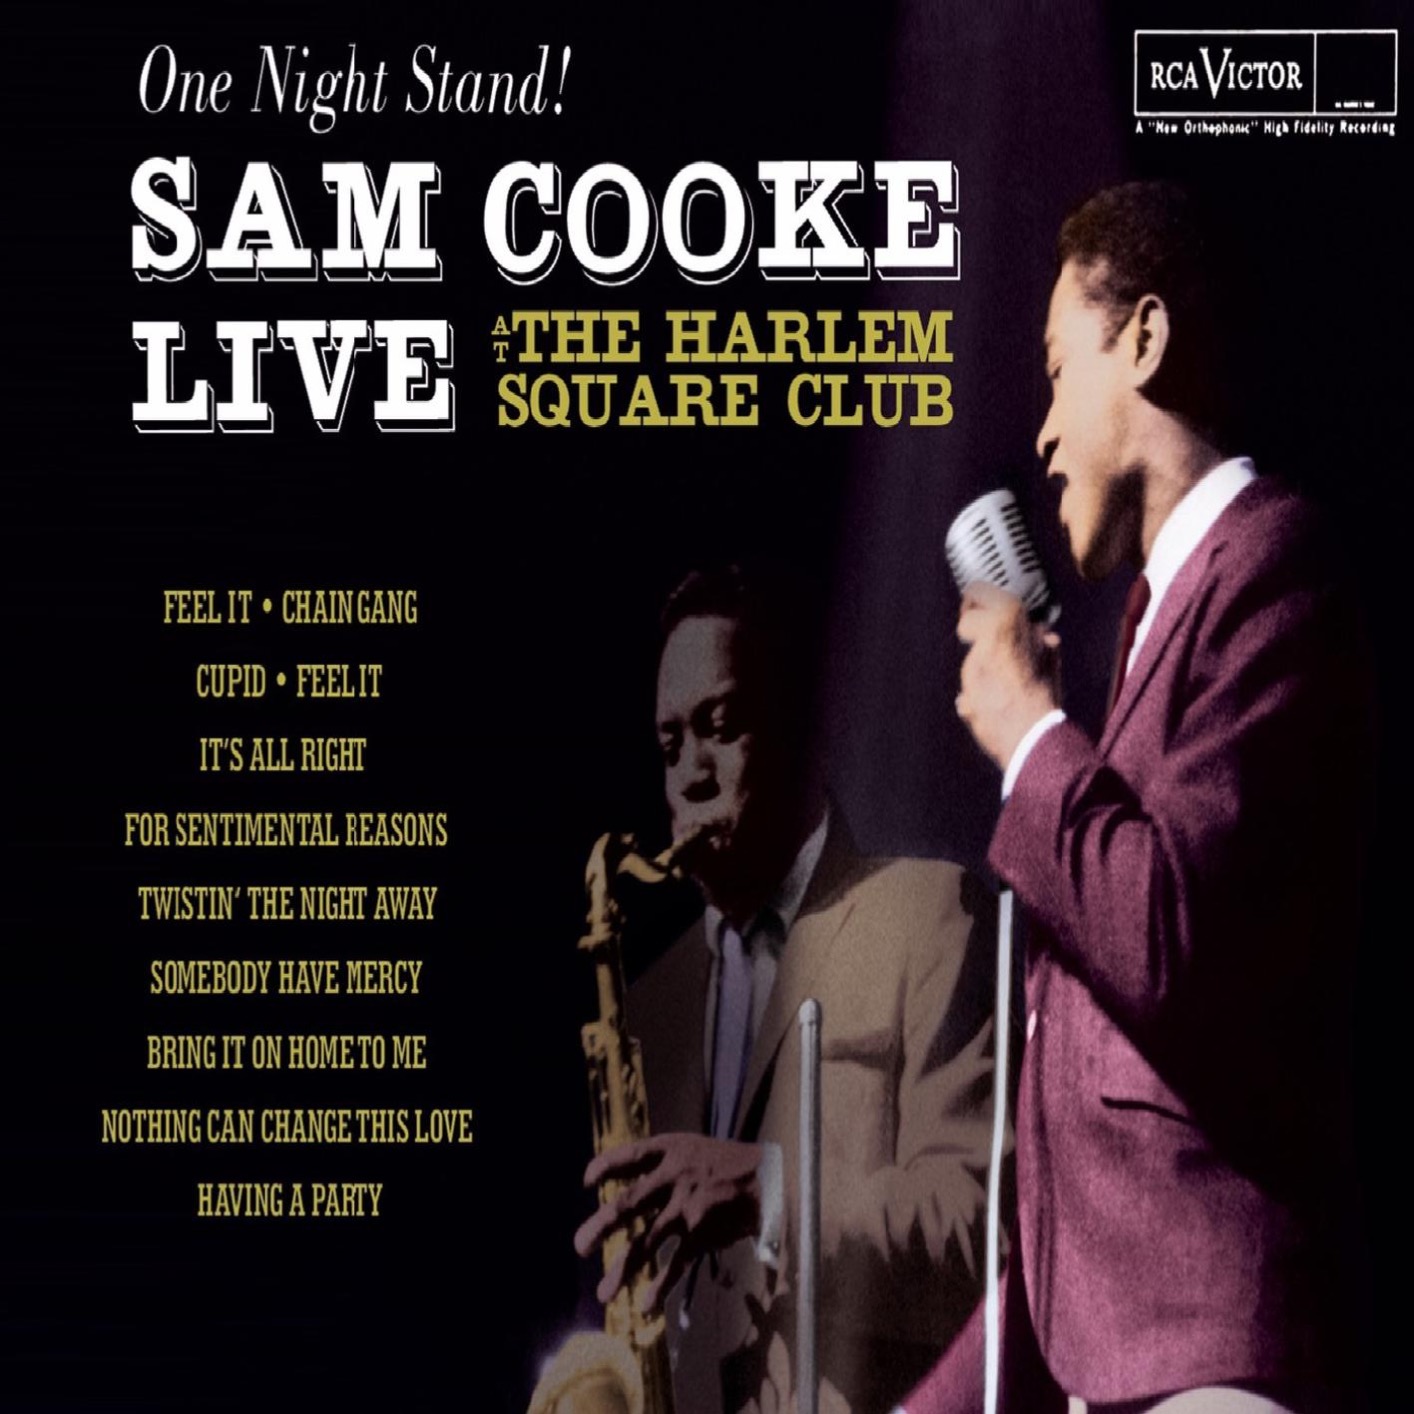 One Night Stand Sam Cooke Live At The Harlem Square Club 1963 Album Of Sam Cooke Buy Or 